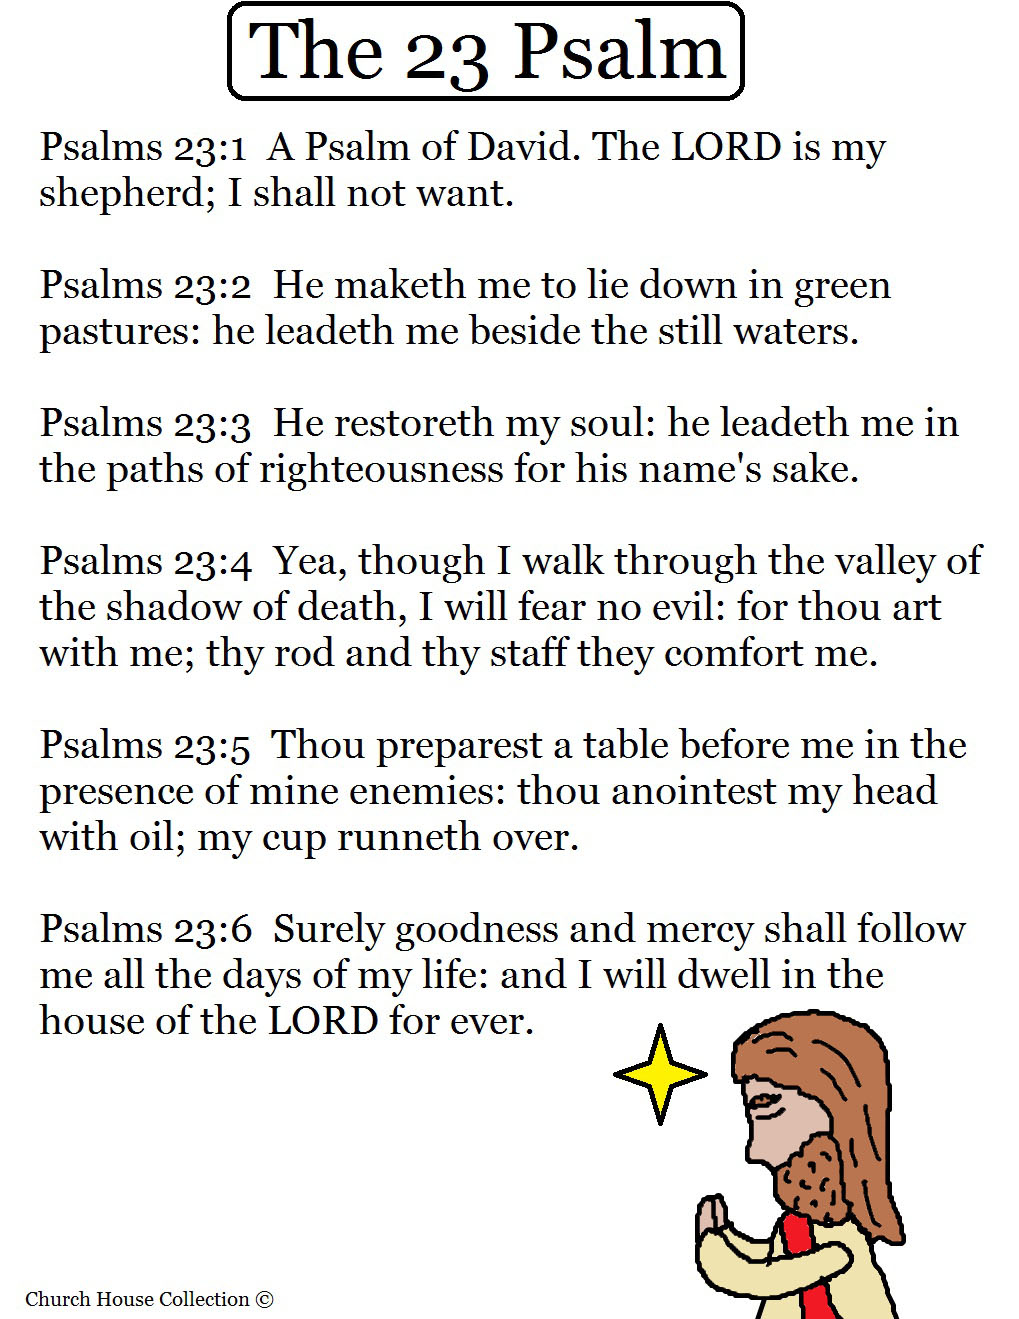 the lord is my shepherd clipart - photo #25